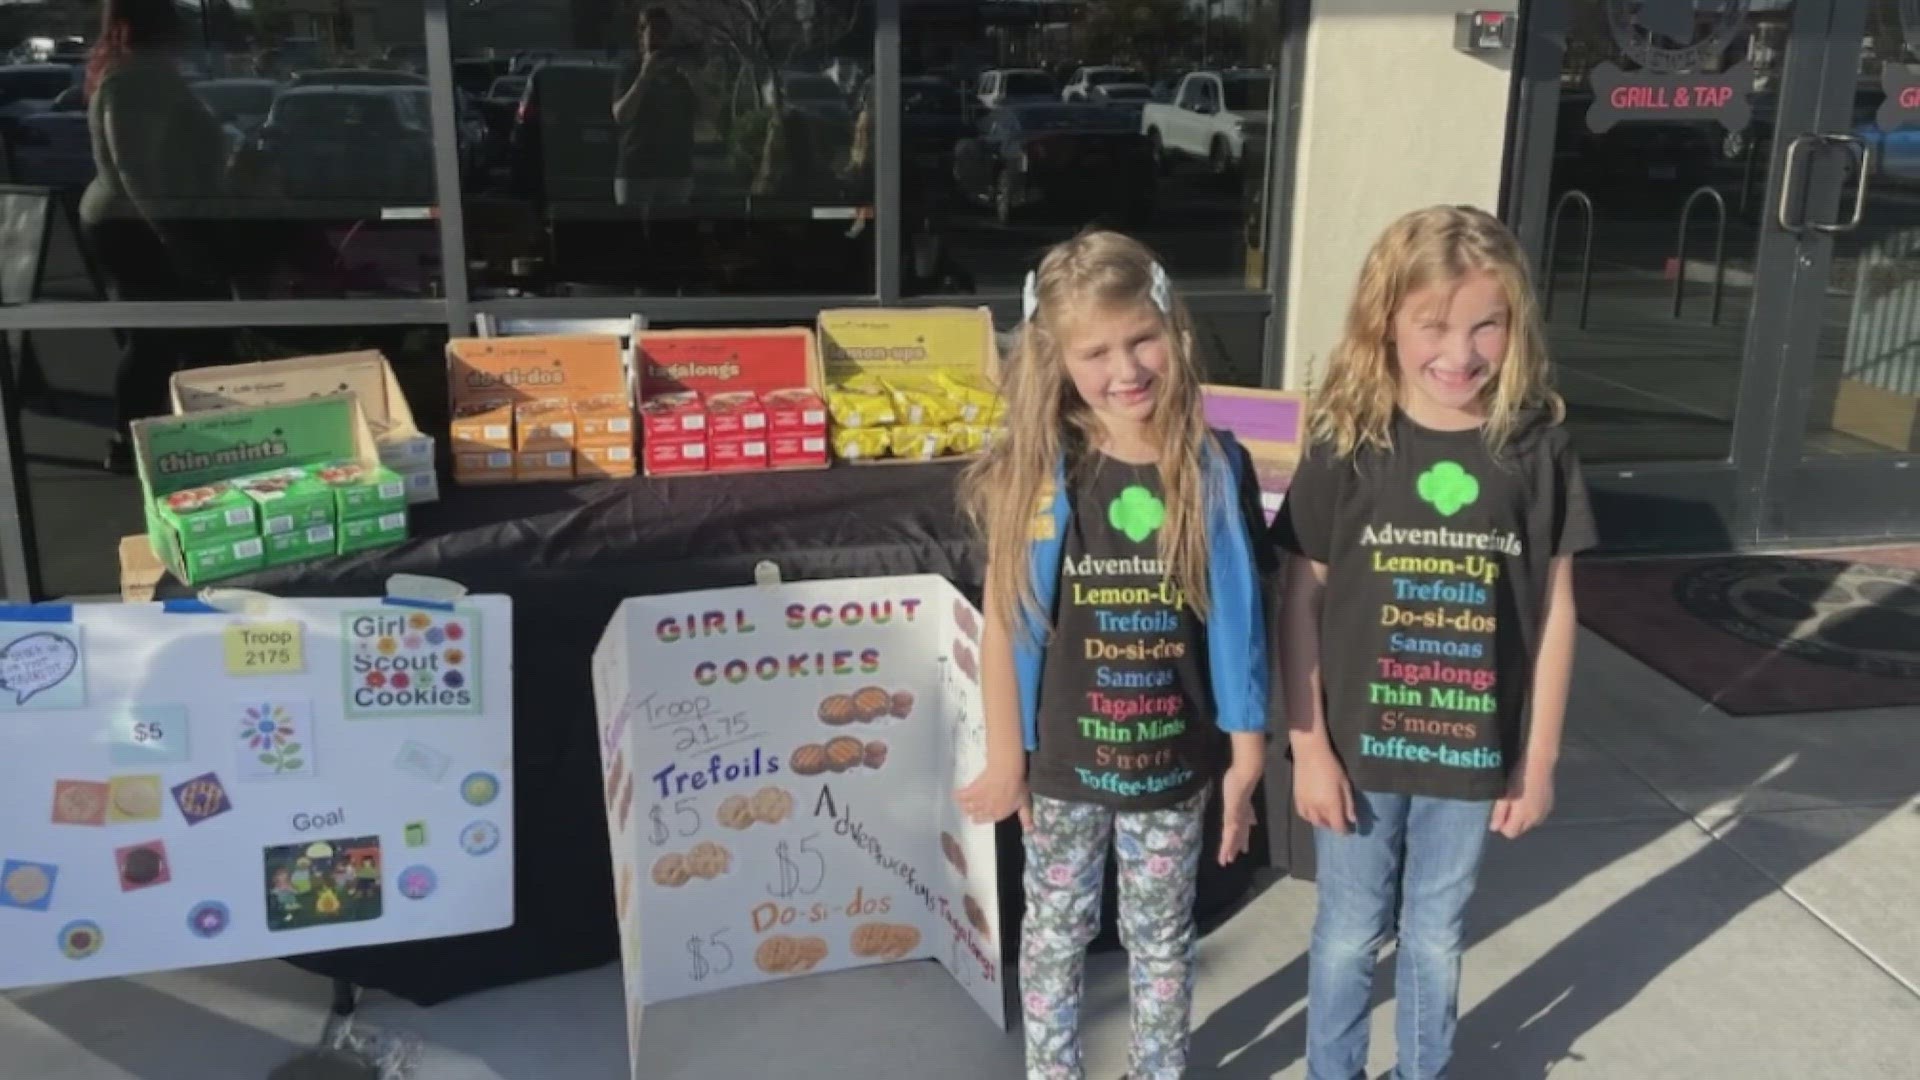 A Mesa Girl Scout troop says someone used fake money to buy several boxes of cookies, now they have to foot the bill.